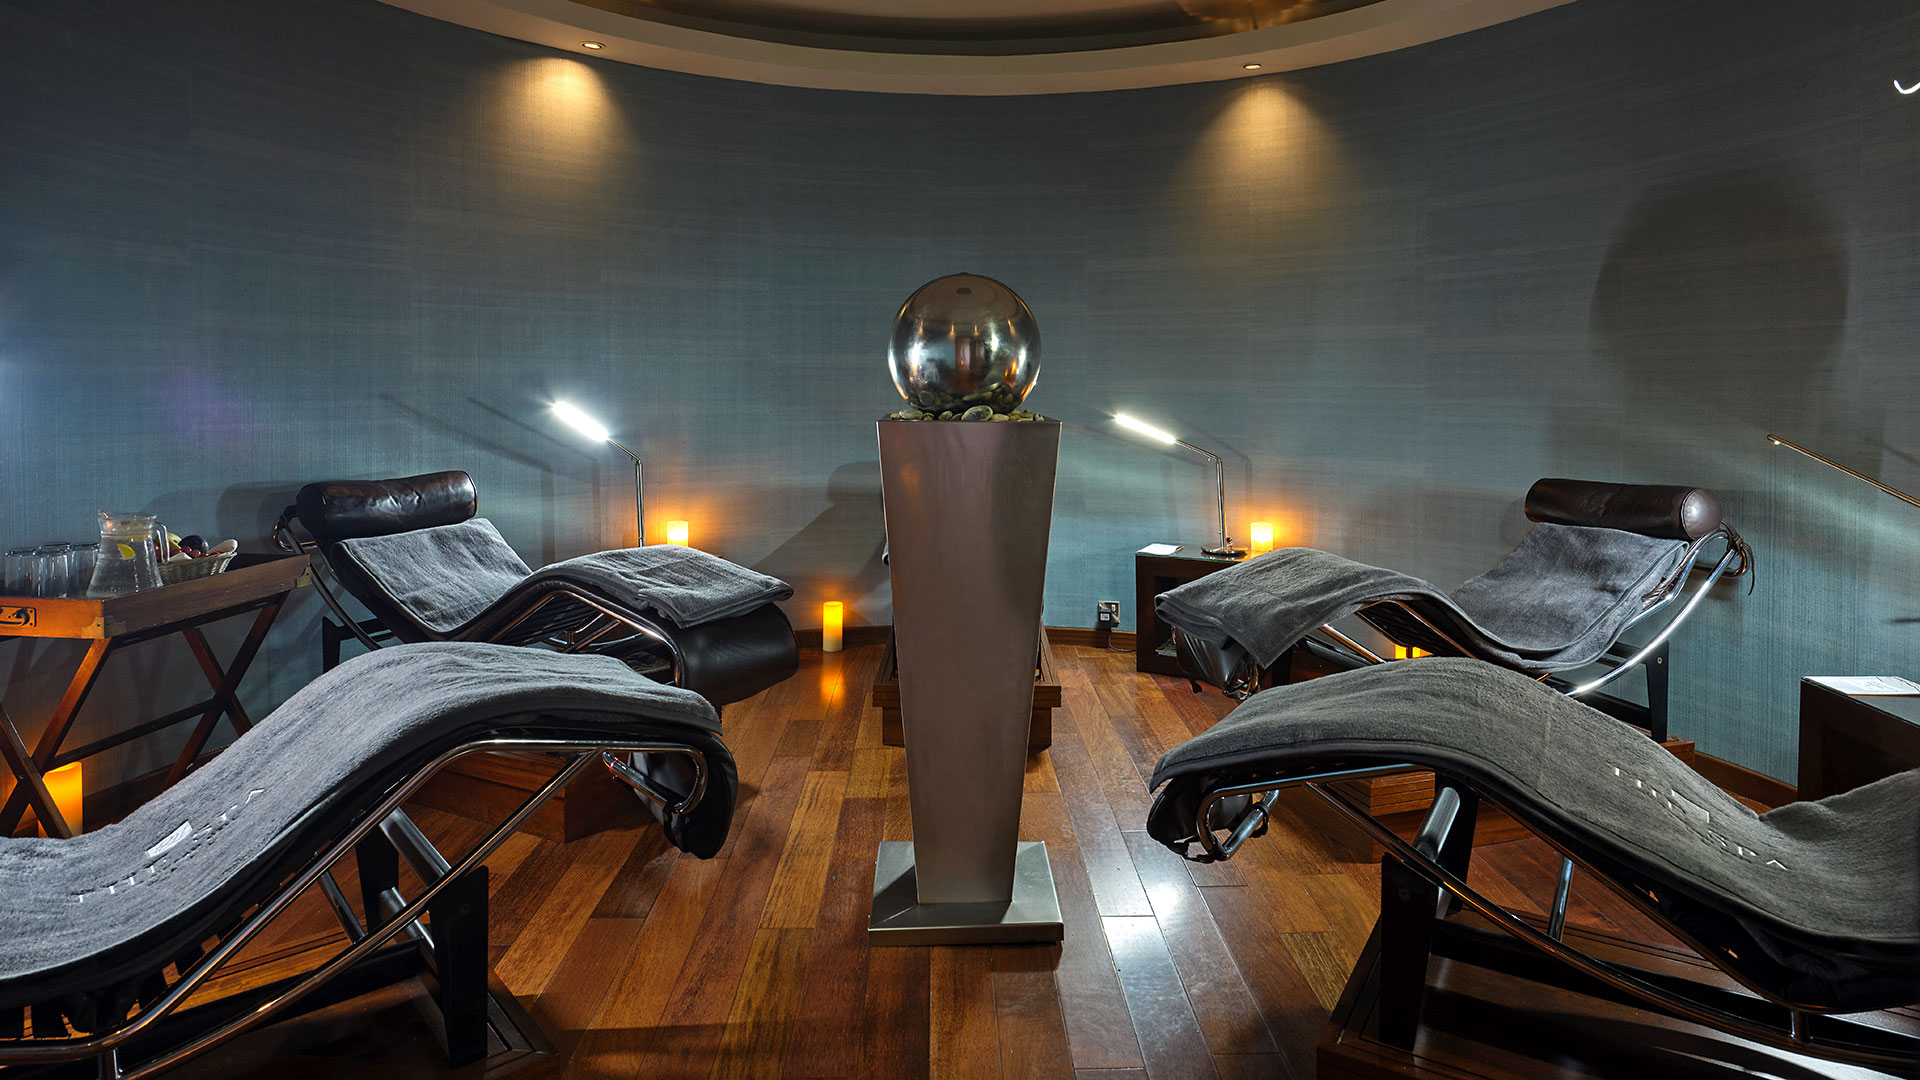 Spa Relaxation room with loungers - Rowton Hall Hotel, Chester